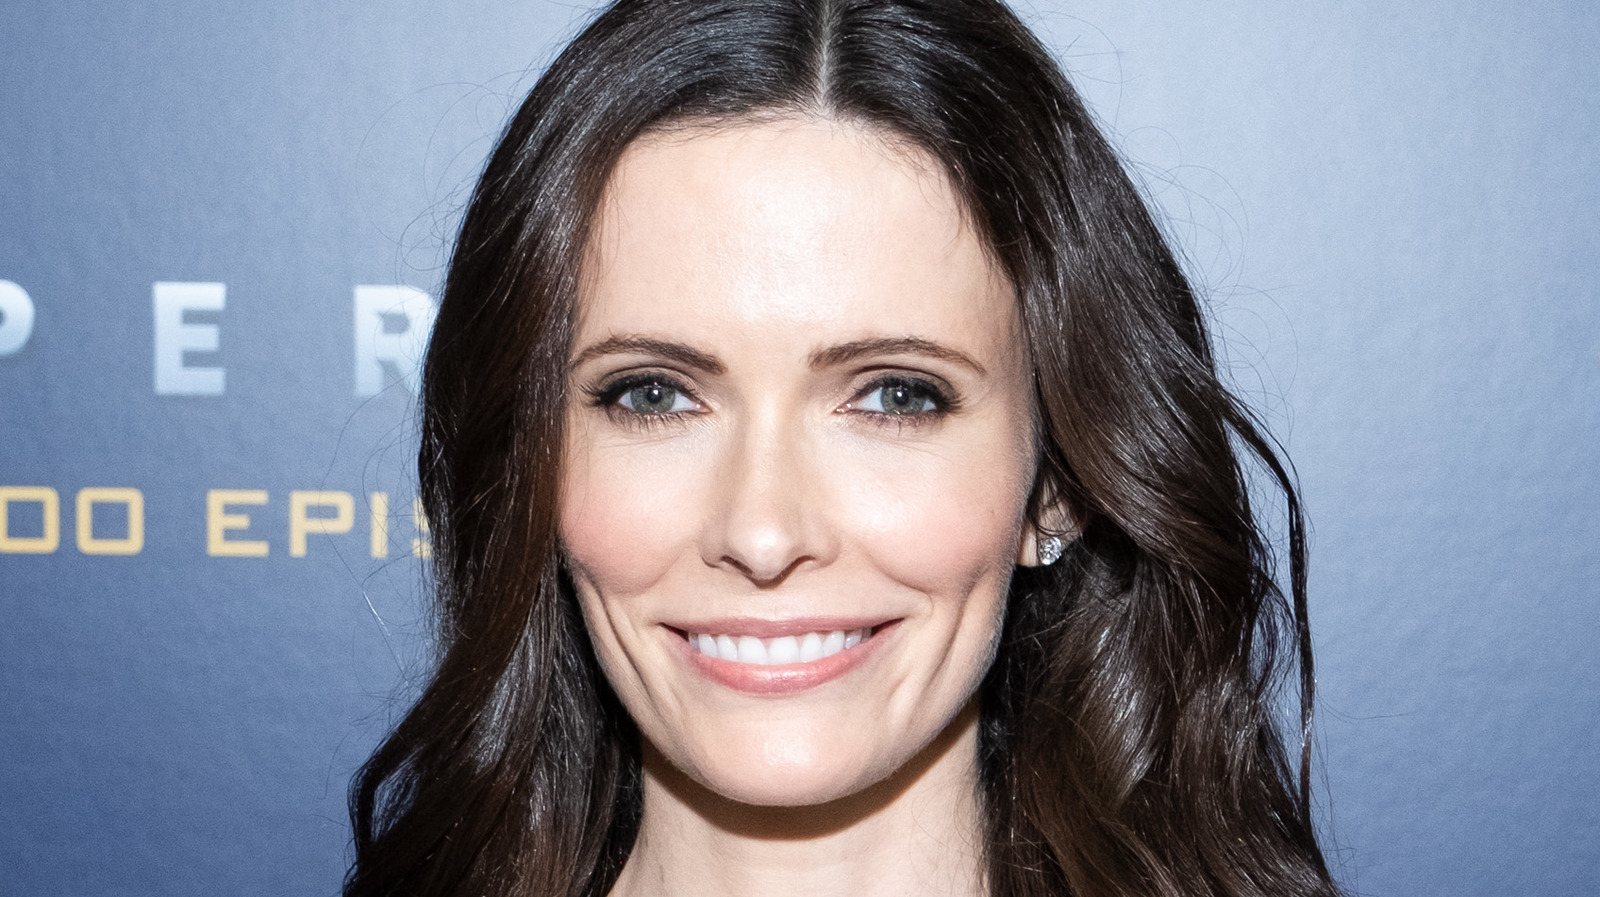 The Unsaid Truth About Bitsie Tulloch's Husband